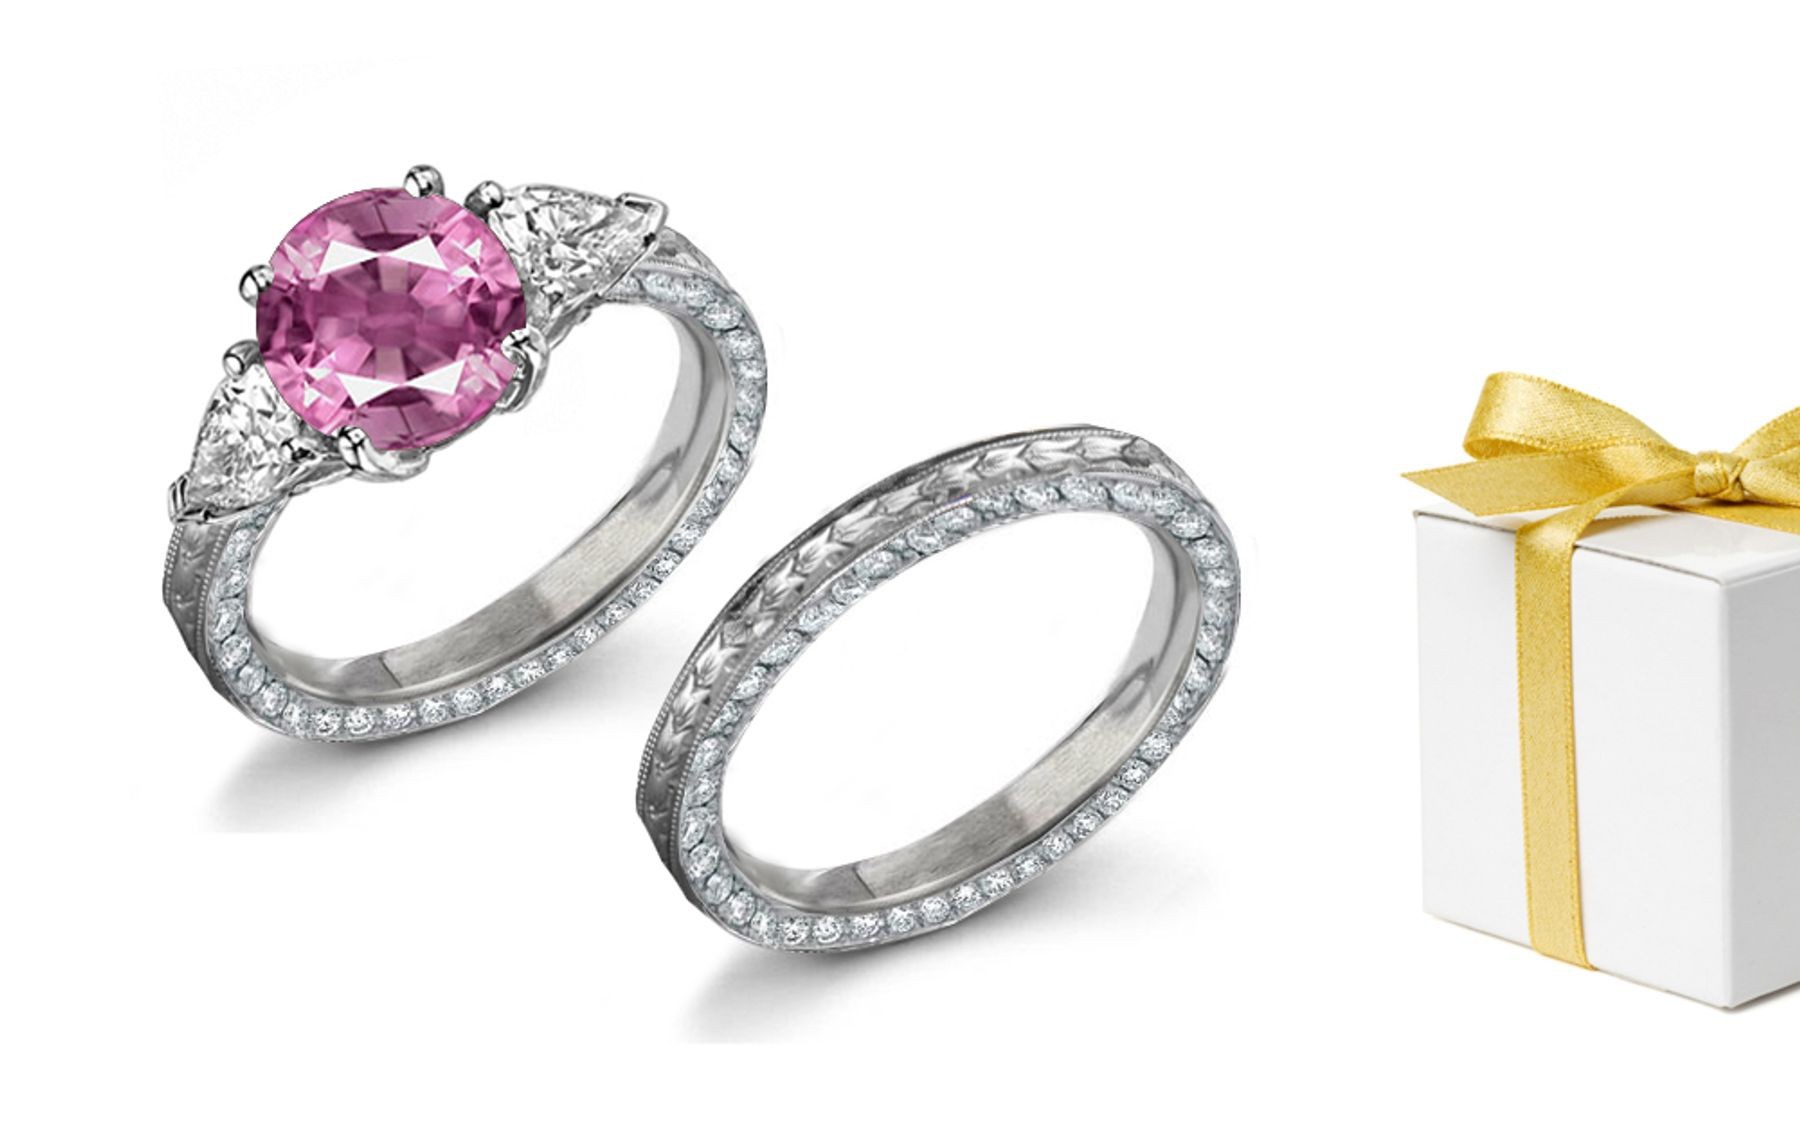 Elegant: Engraved Pink Sapphire & Diamond Ring Availability: In stock